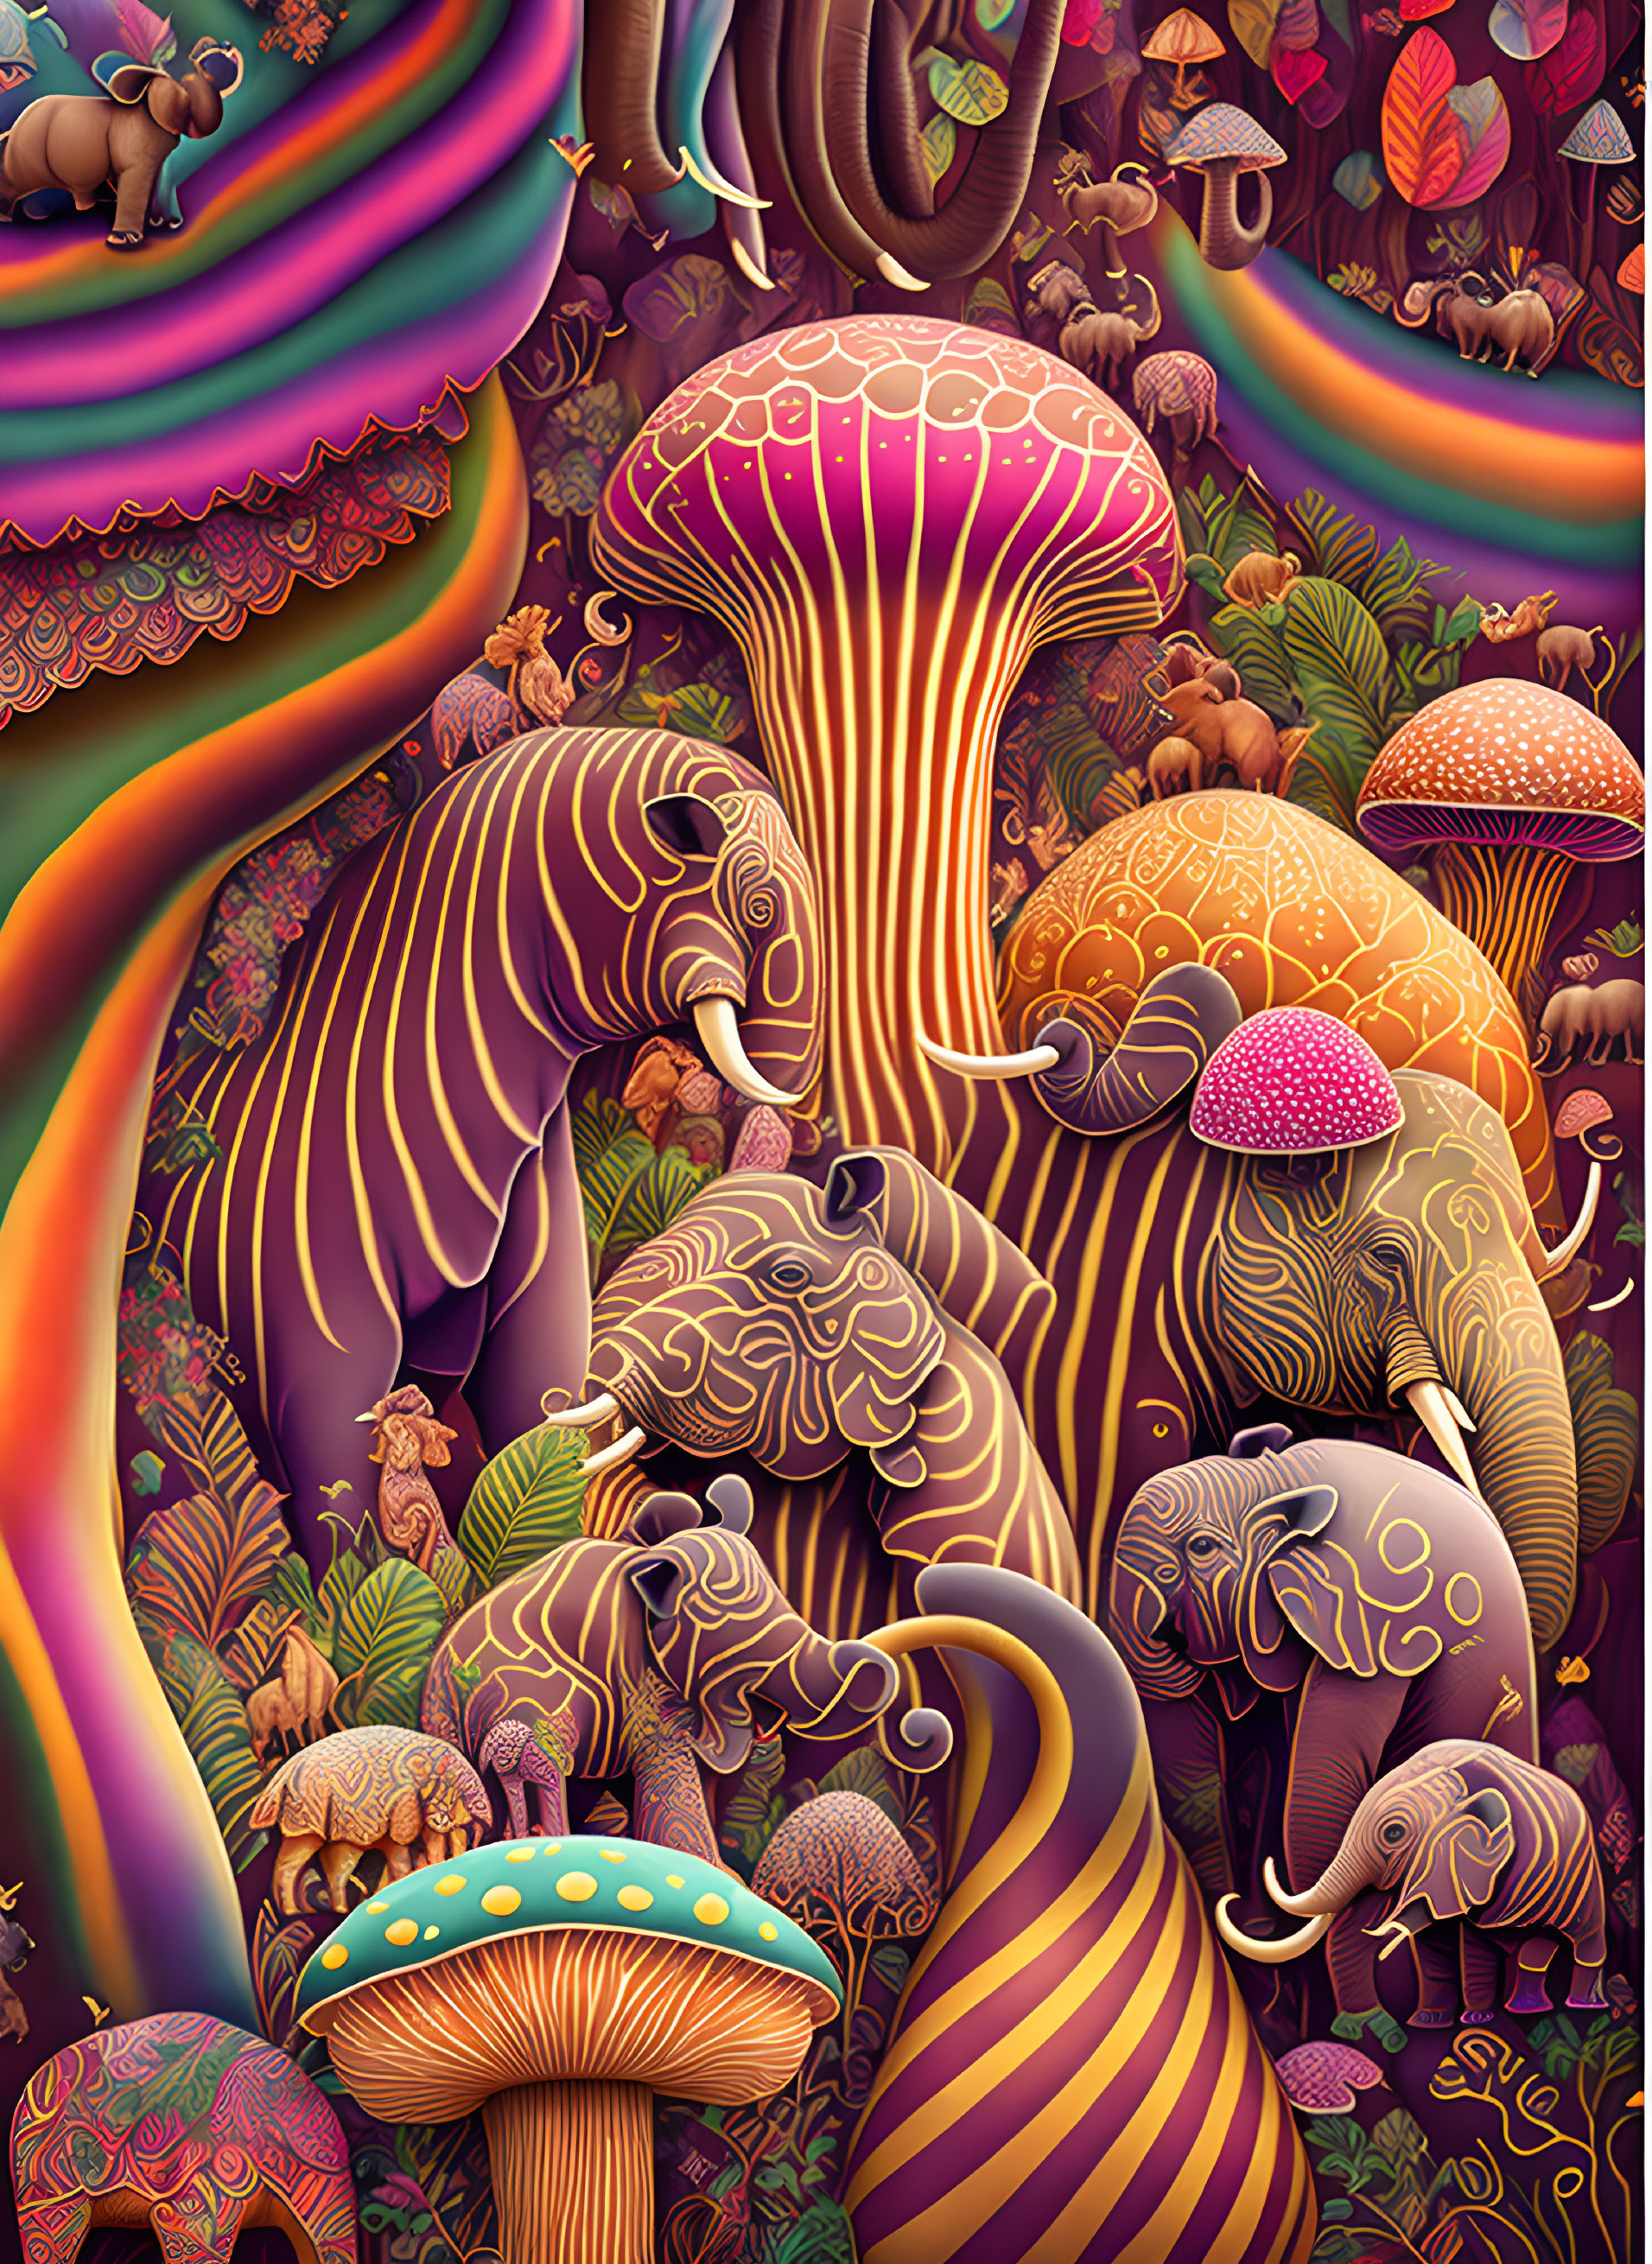 Crazy animals combined with mushrooms